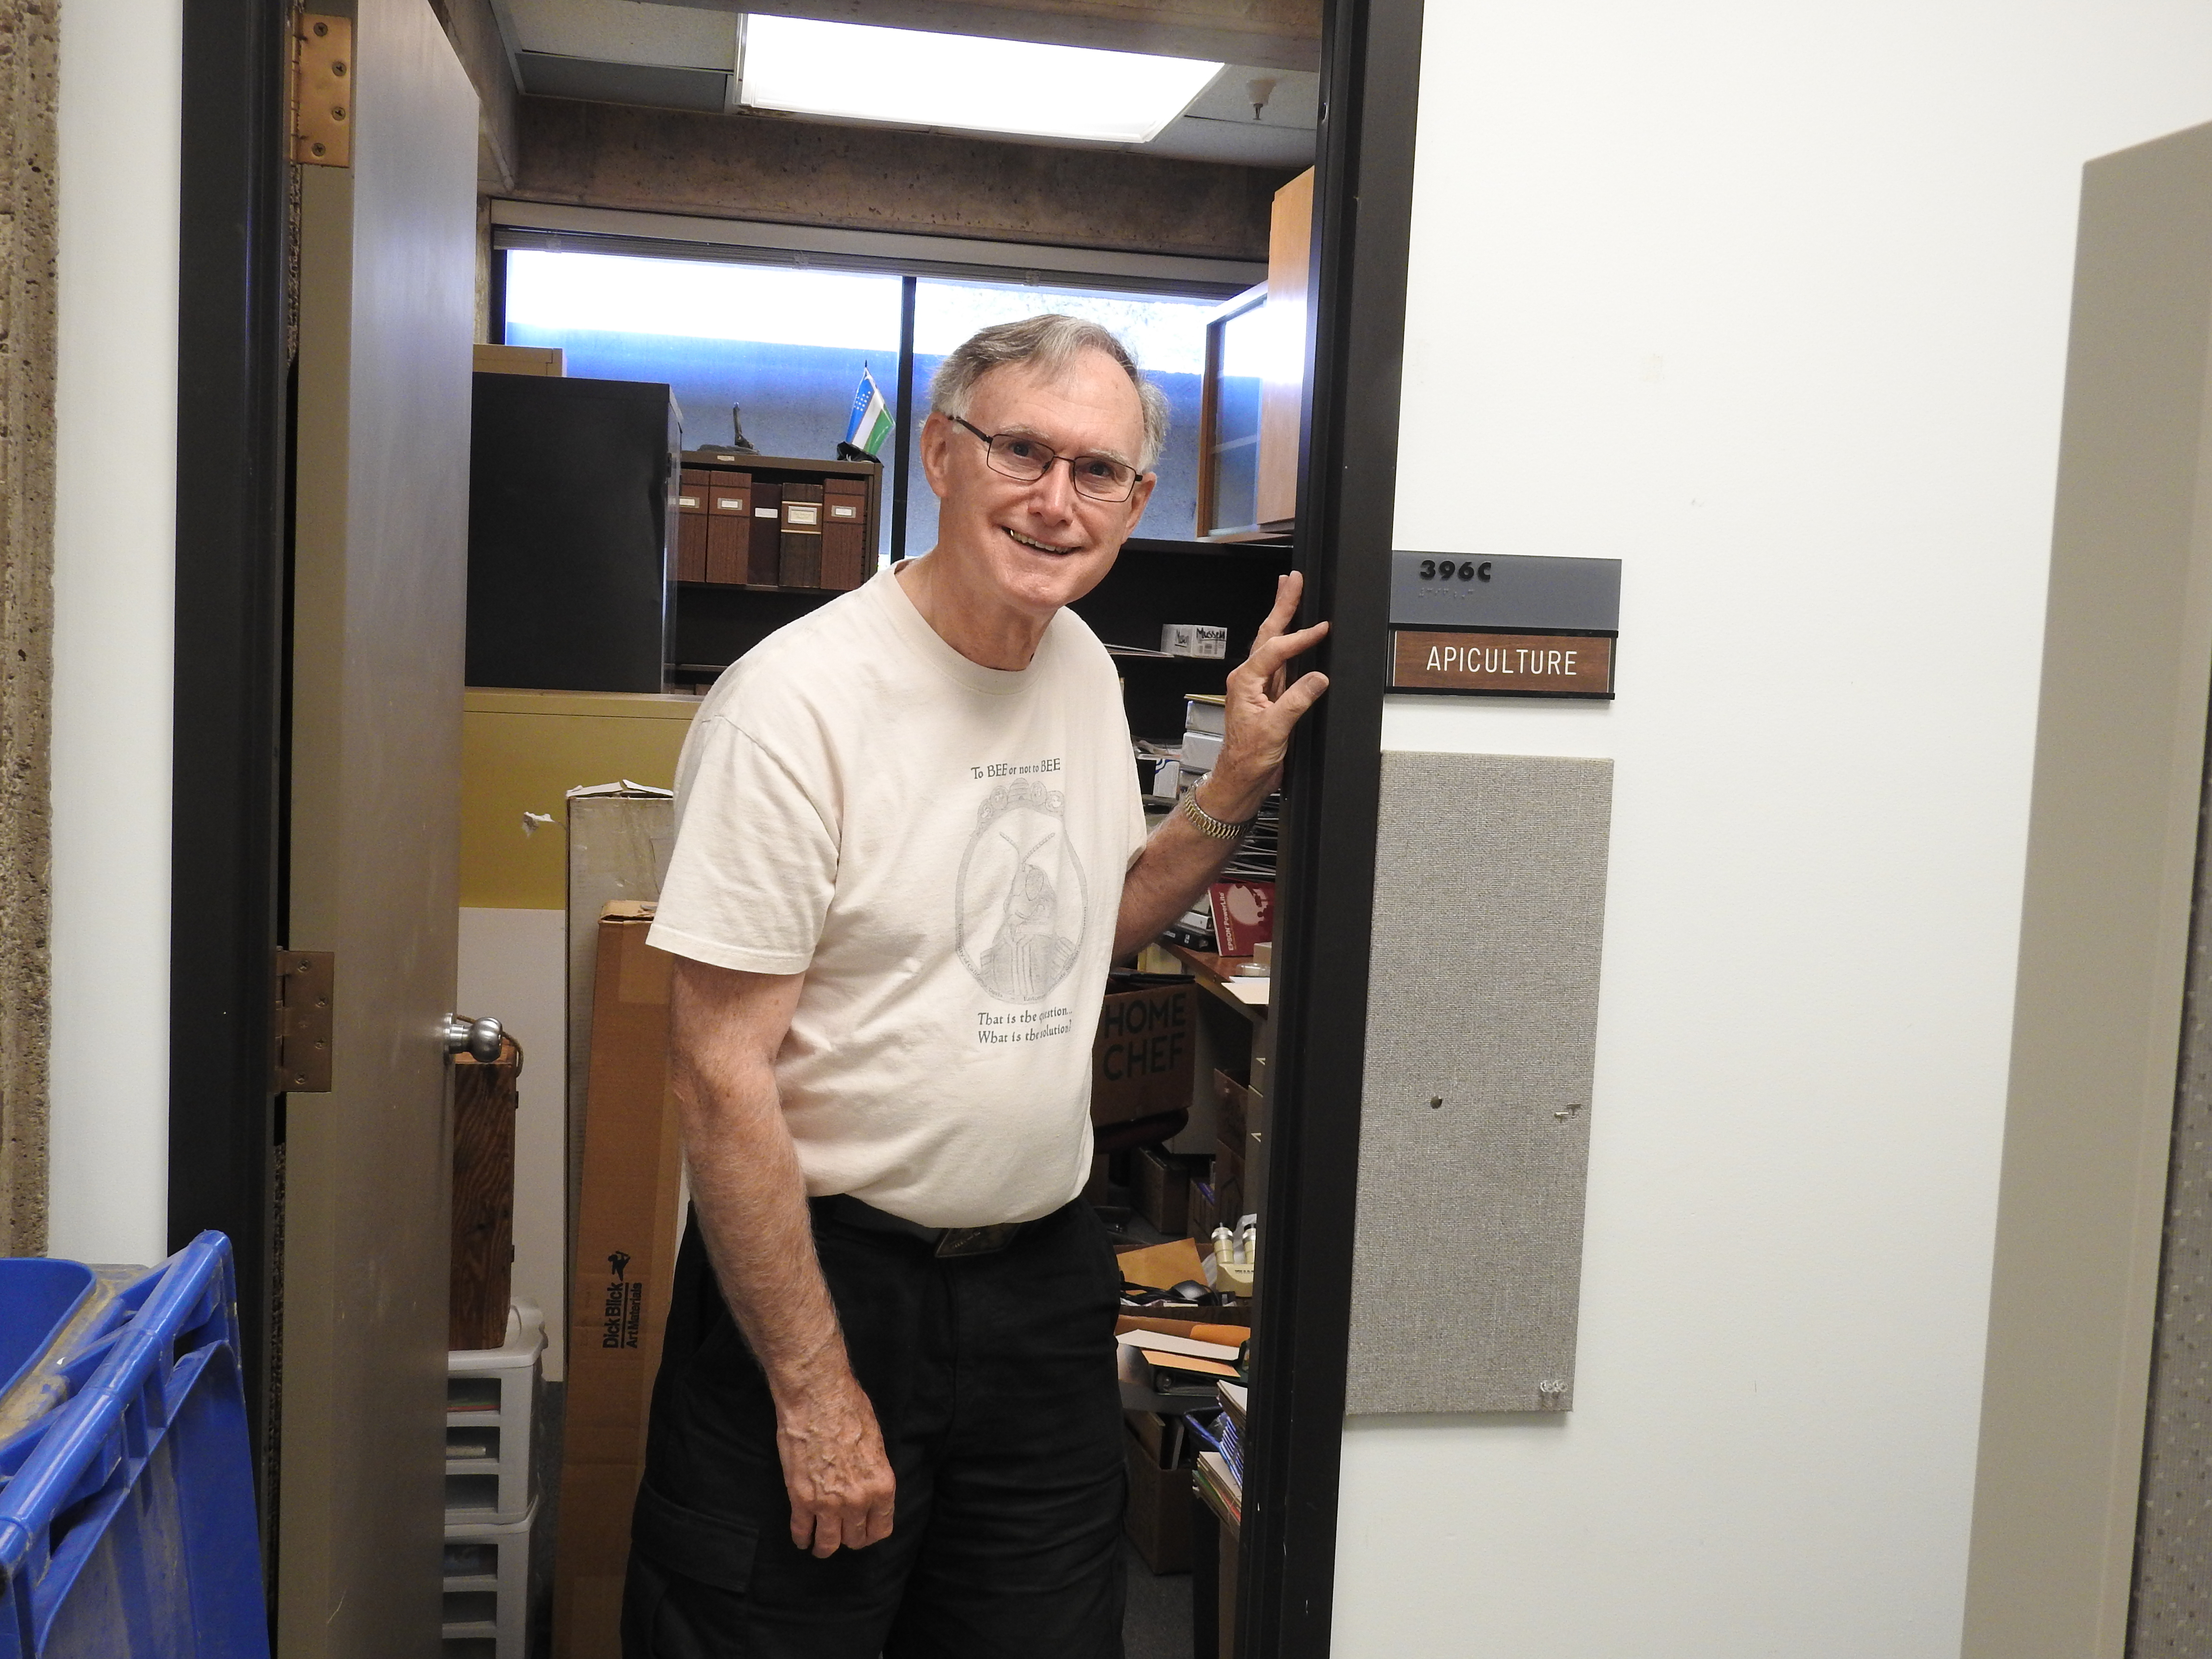 Eric Mussen, a 38-year UC Cooperative Extension apiculturist and member of the UC Davis Department of Entomology and Nematology office, leaves his office for the last time. He retired in 2014 and cleaned out his office in 2021. (Photo by Kathy Keatley Garvey)